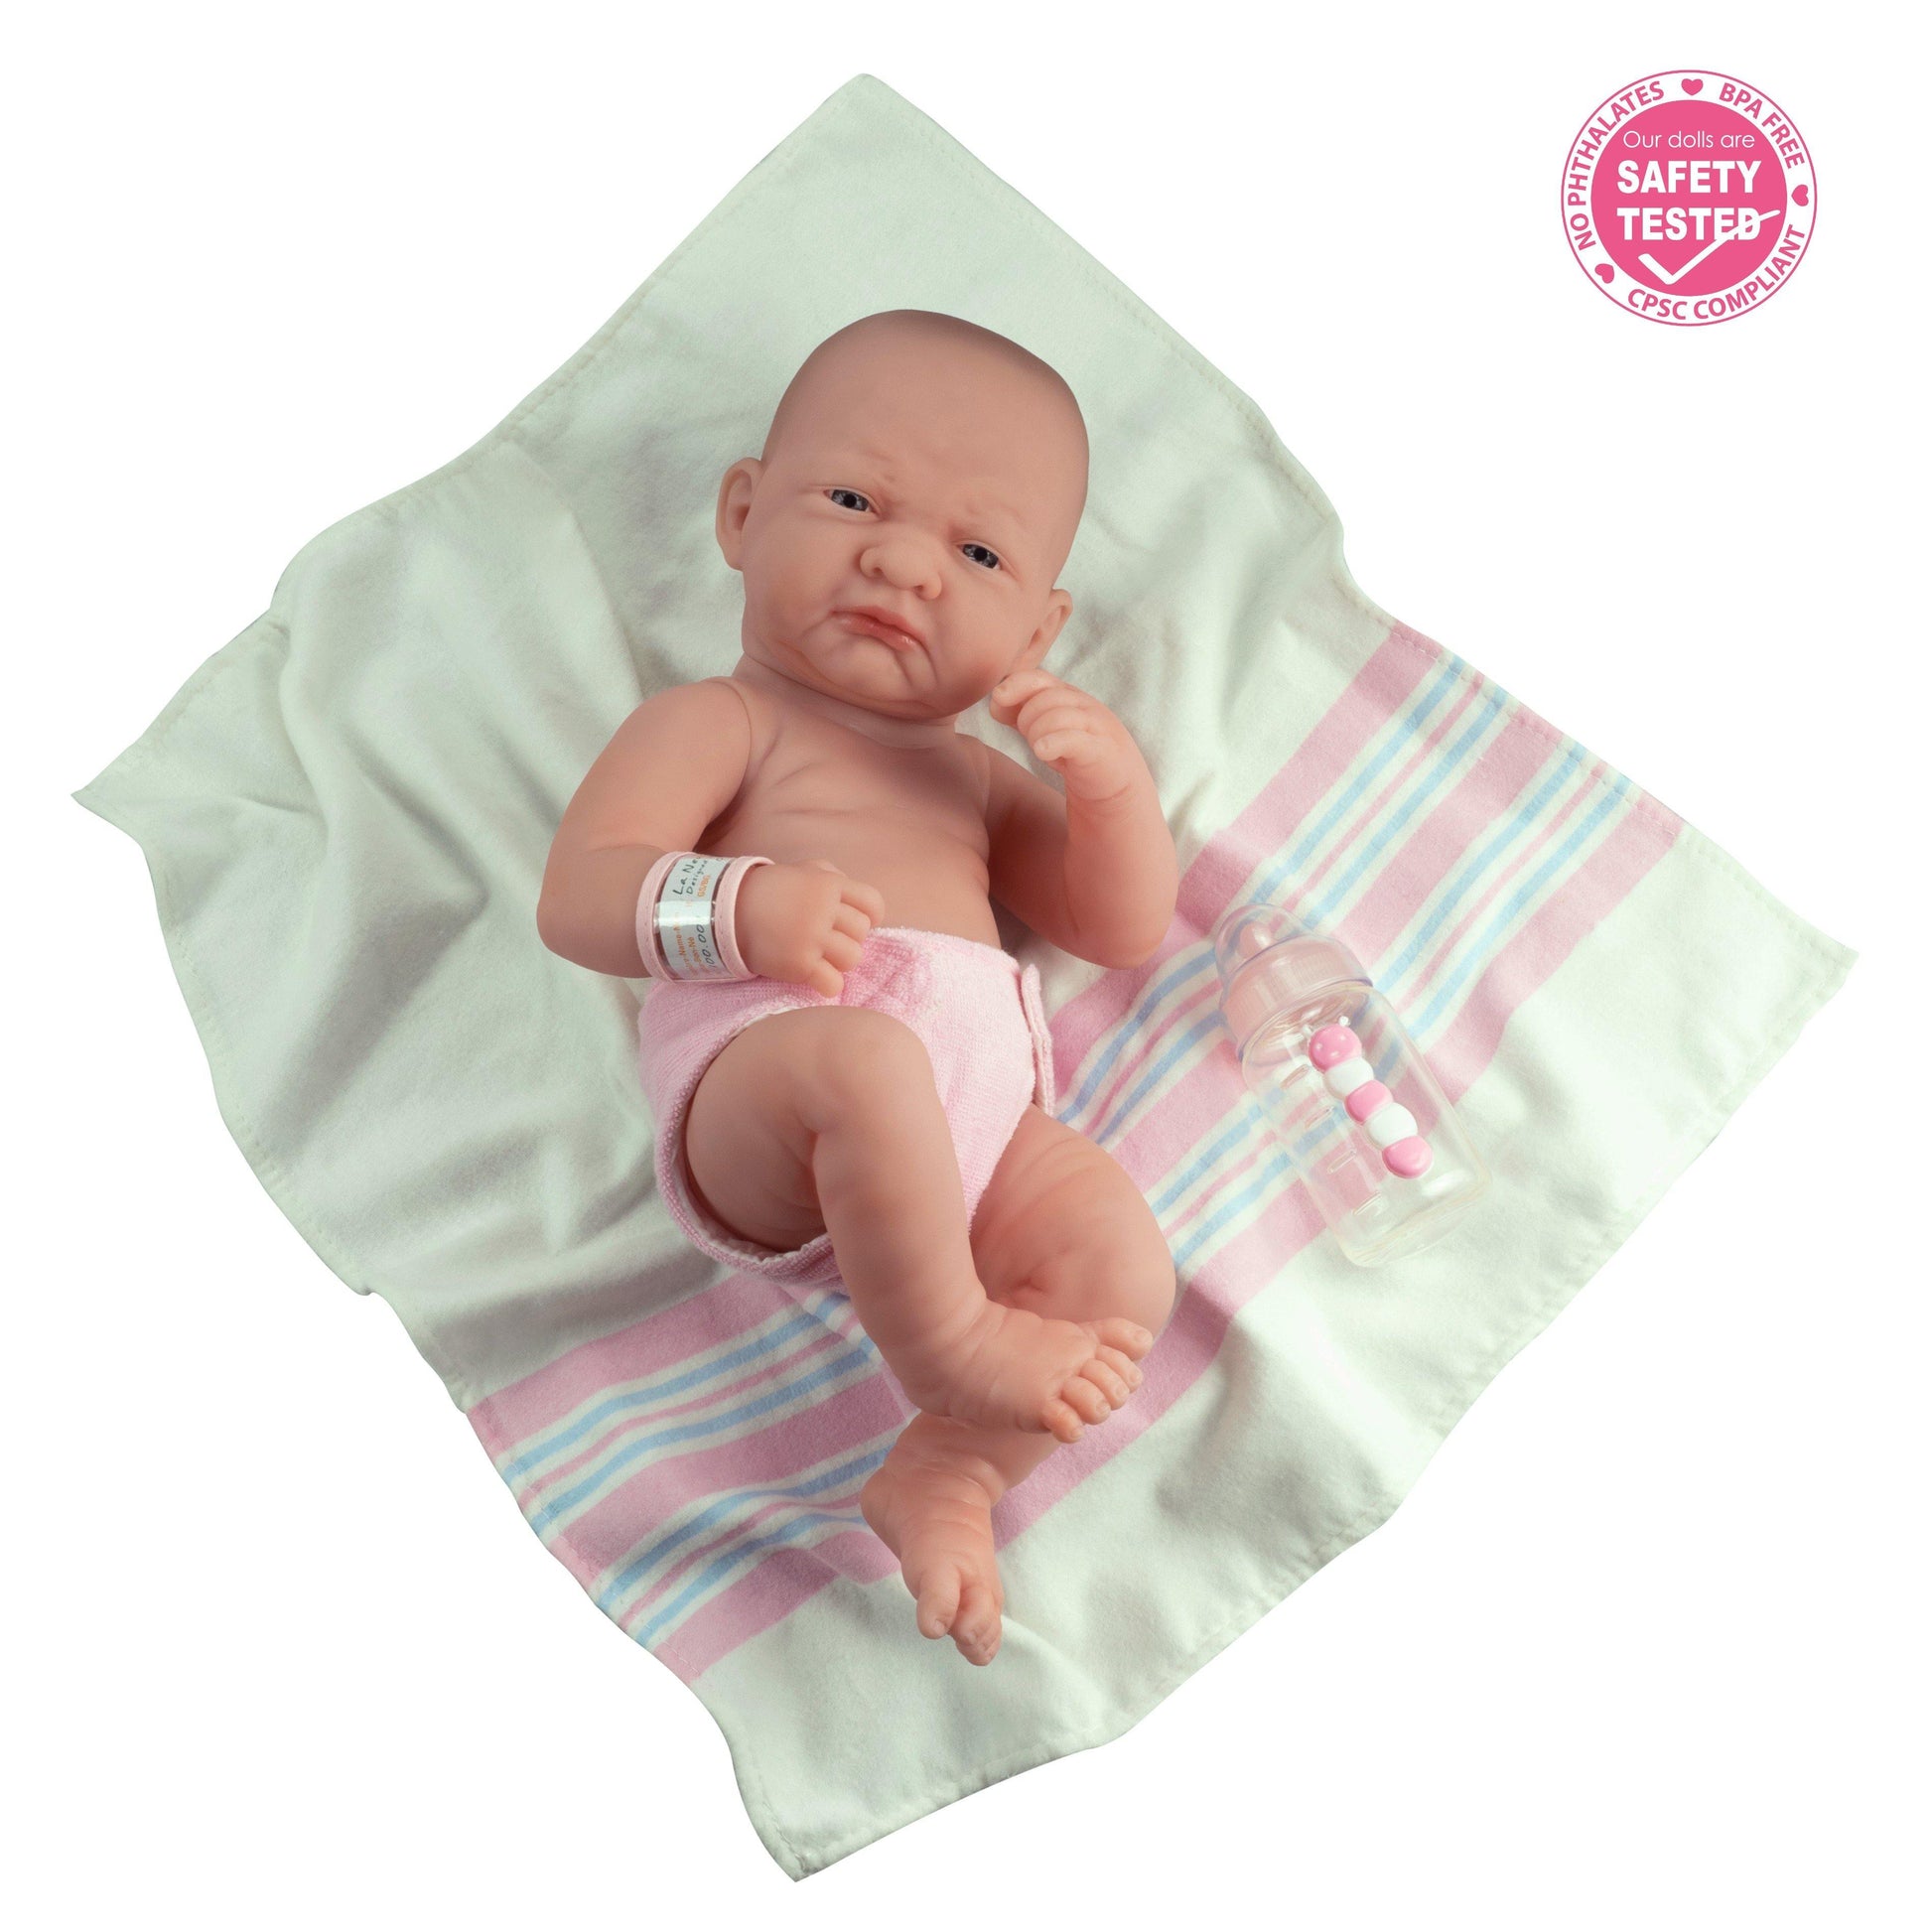 La Newborn "First Day" 15" Real Girl - JC Toys Group Inc.